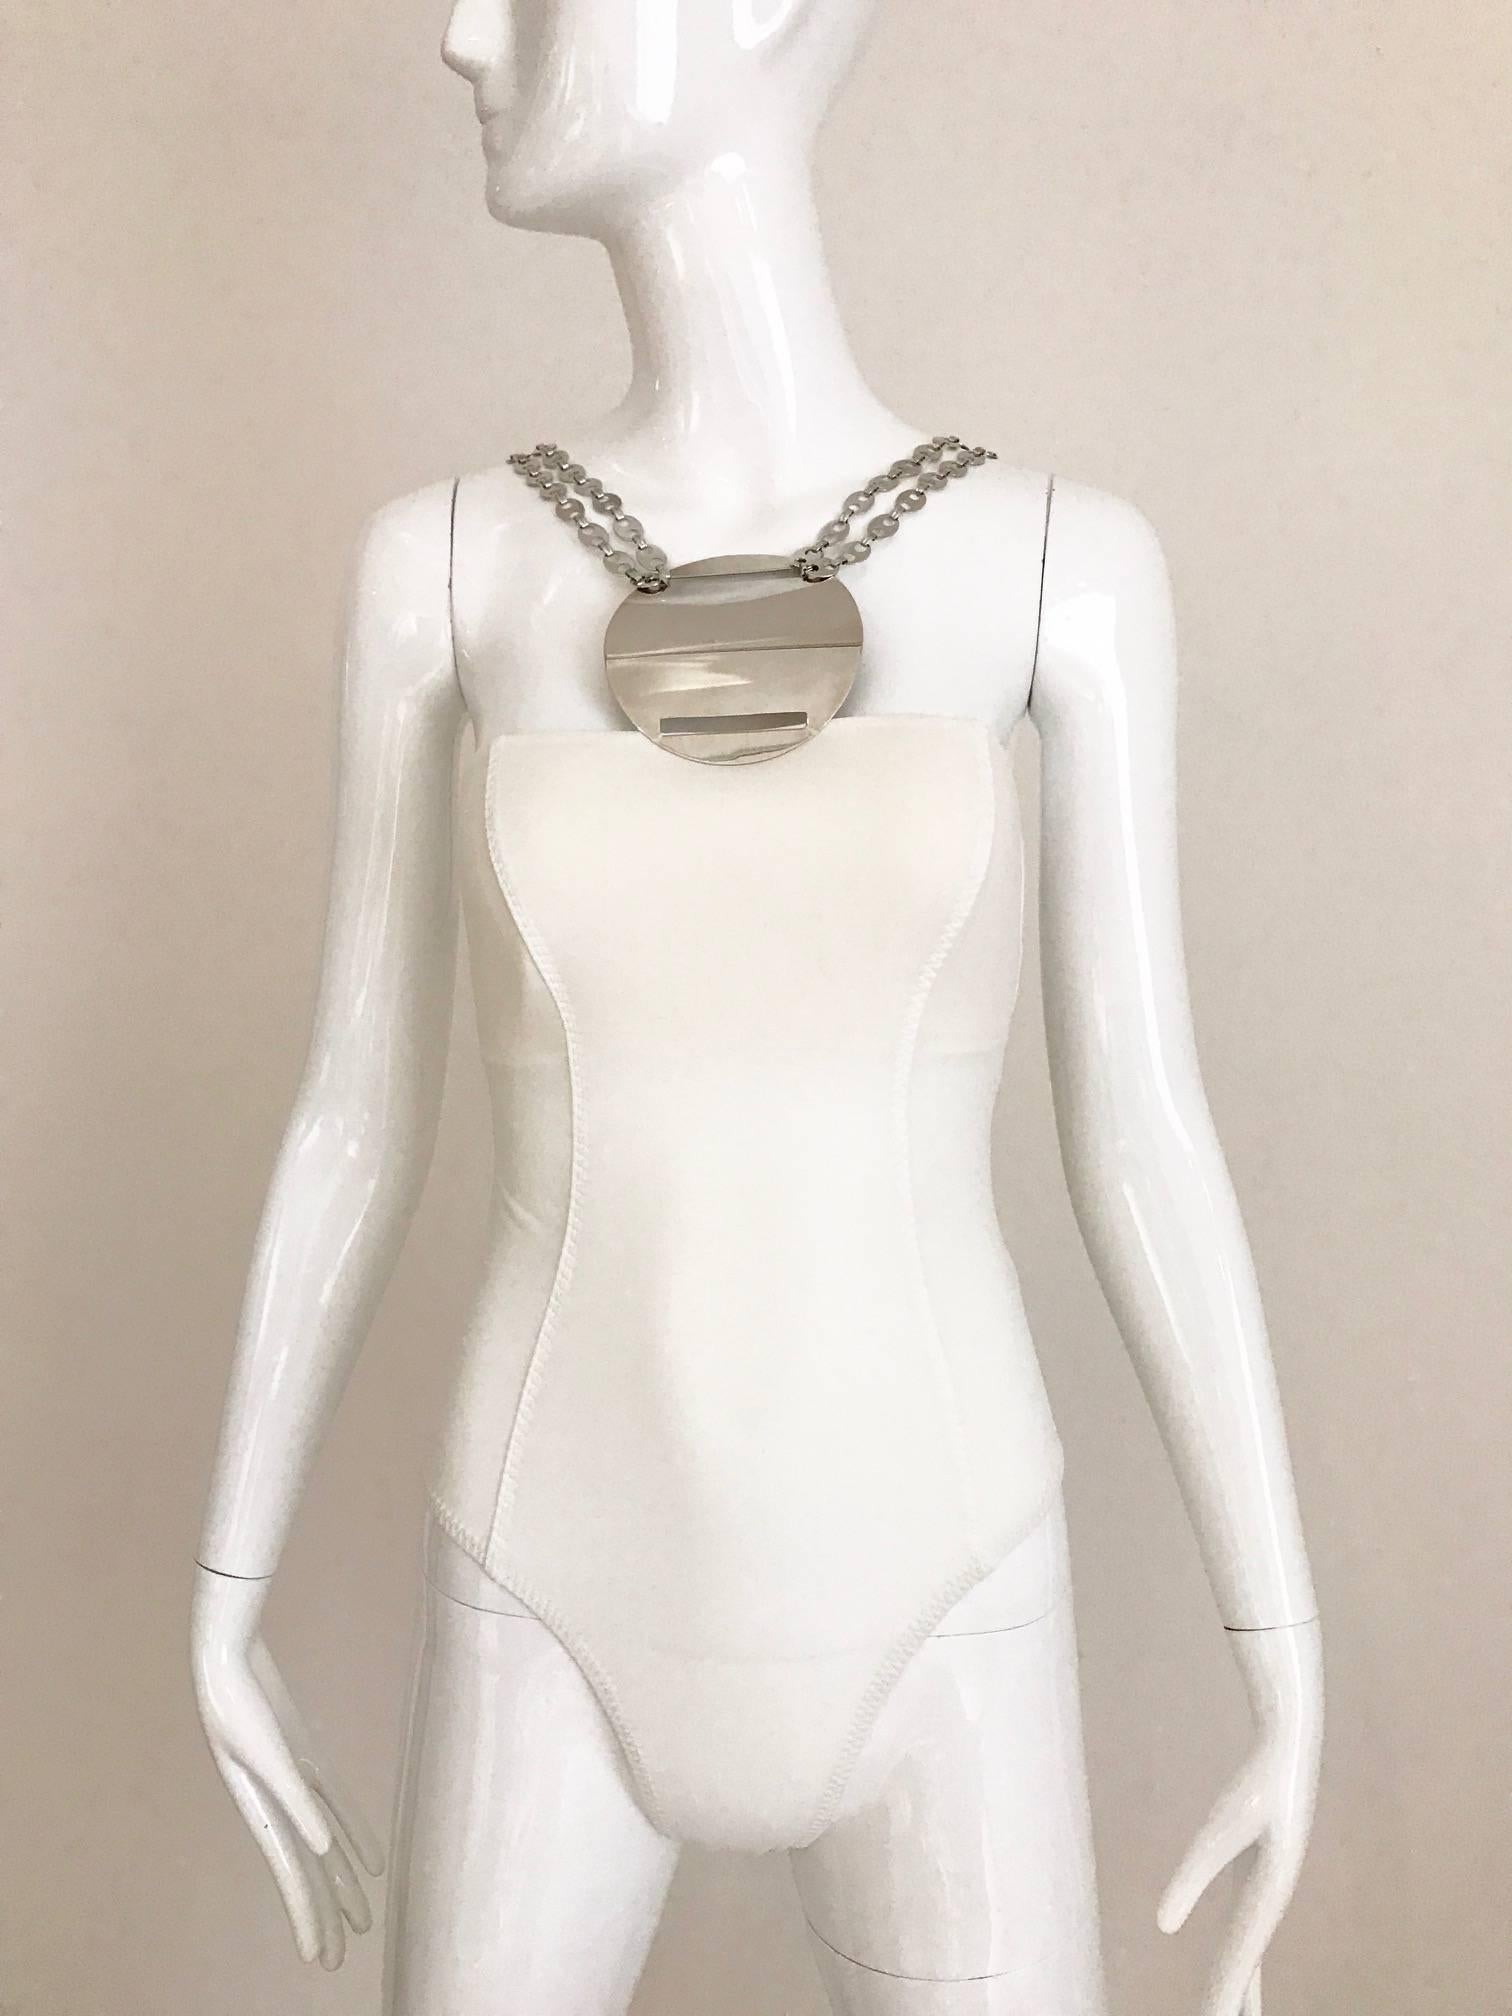 Vintage Paco Rabanne 90s White Bathing Suit with metal plate and chain link.
Bathing suit can be worn as body suit with skirt or pants. This bathing suit has thin padded bra . Bathing suit is dead stock ( never worn)  This paco rabanne bathing suit